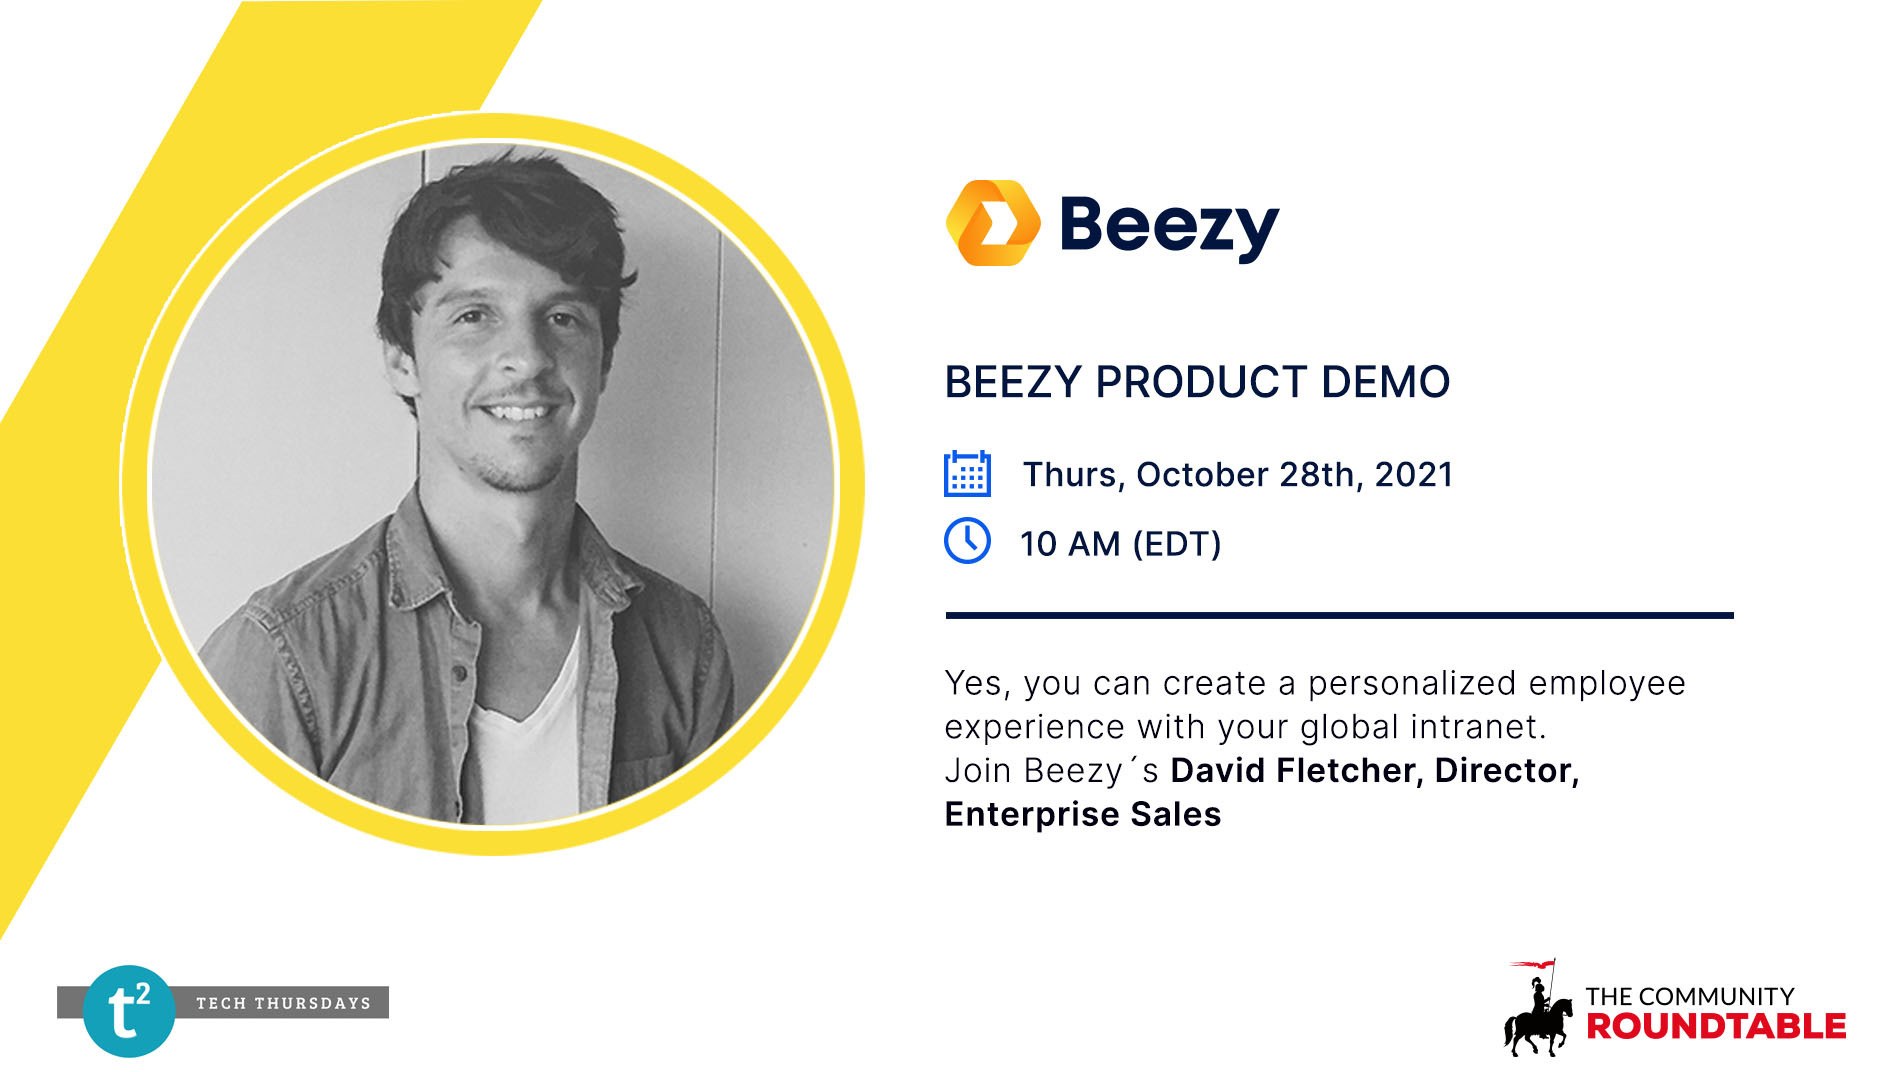 Beezy Product Demo - Global & Local Community Roundtable Oct 28, 2021